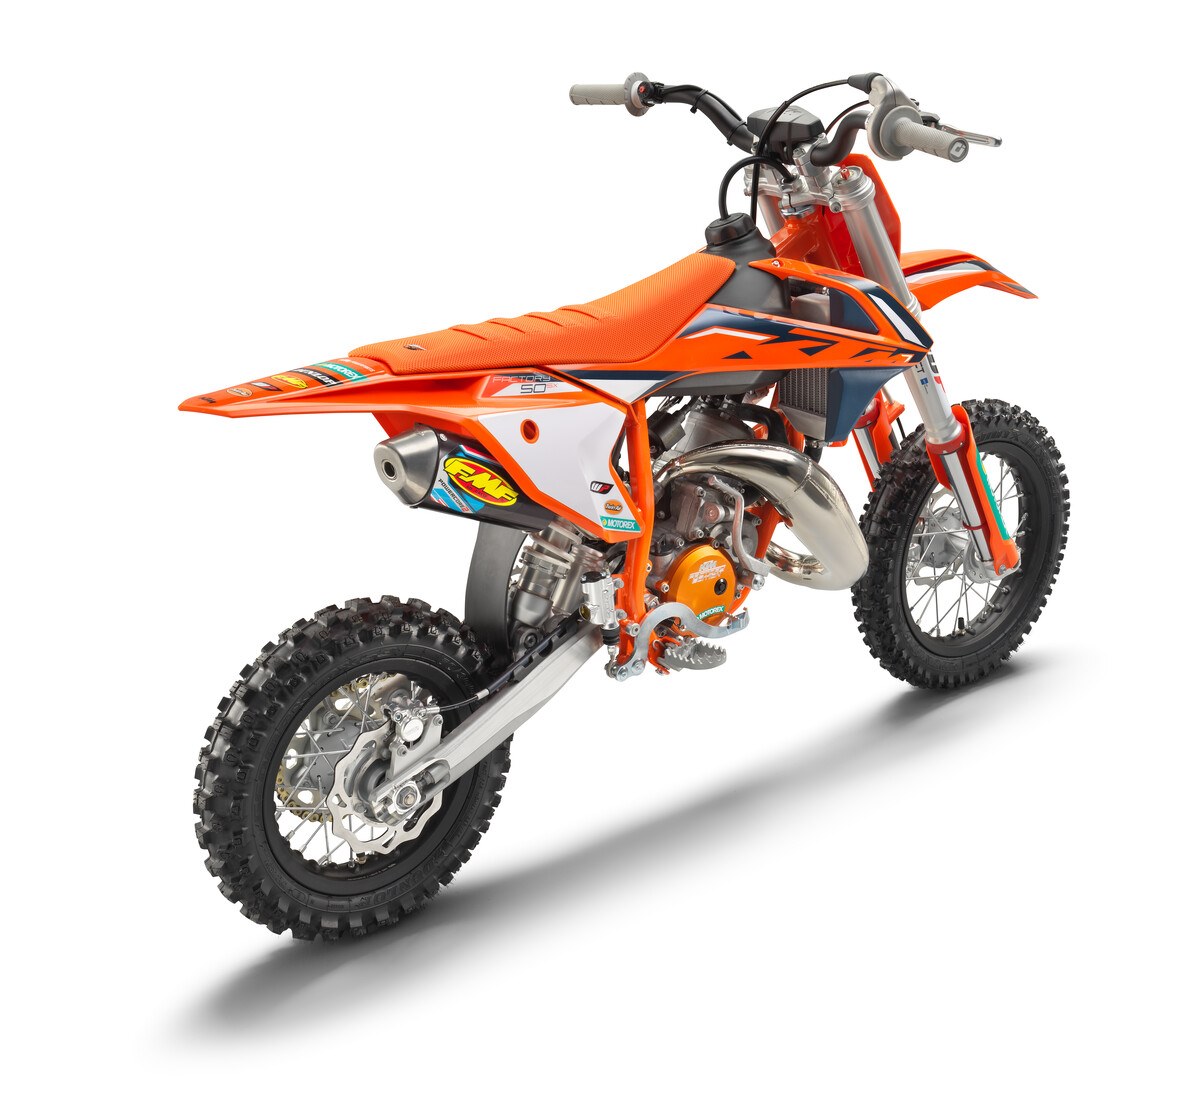 INTRODUCING THE 2023 KTM 50 SX FACTORY EDITION, THE PERFECT START 